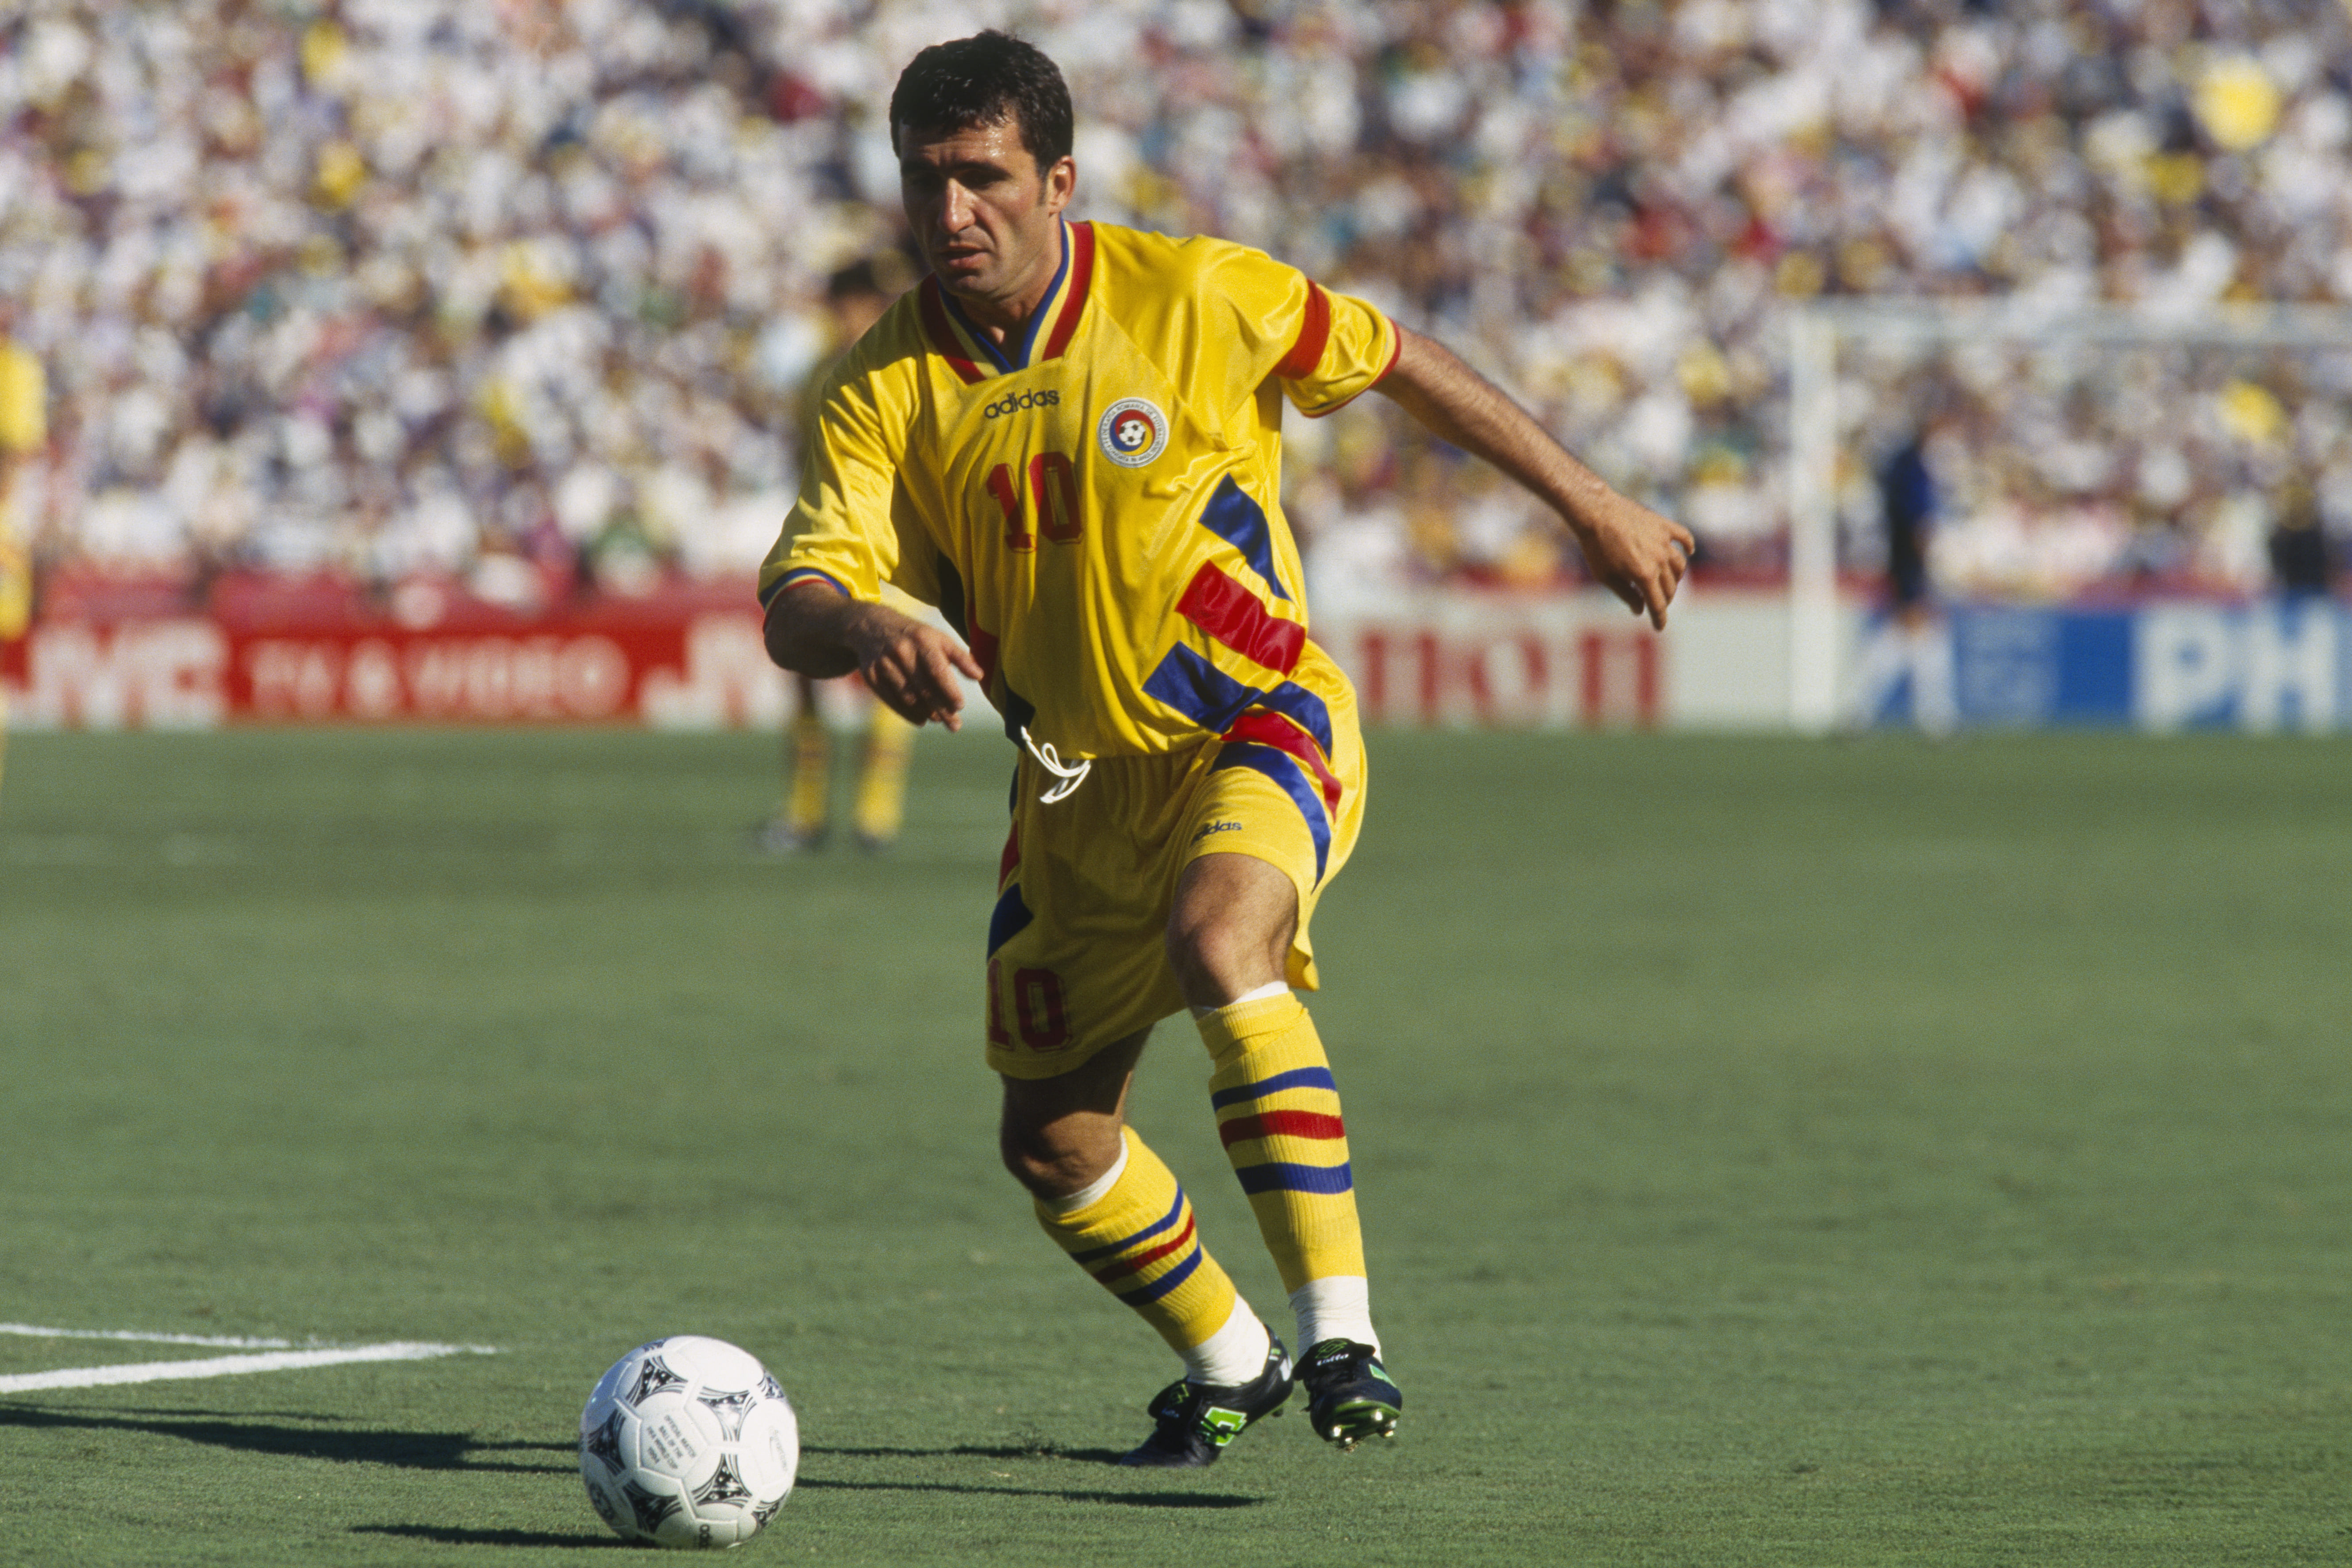 Gheorghe Hagi in action for Romania against Colombia at the 1994 World Cup.